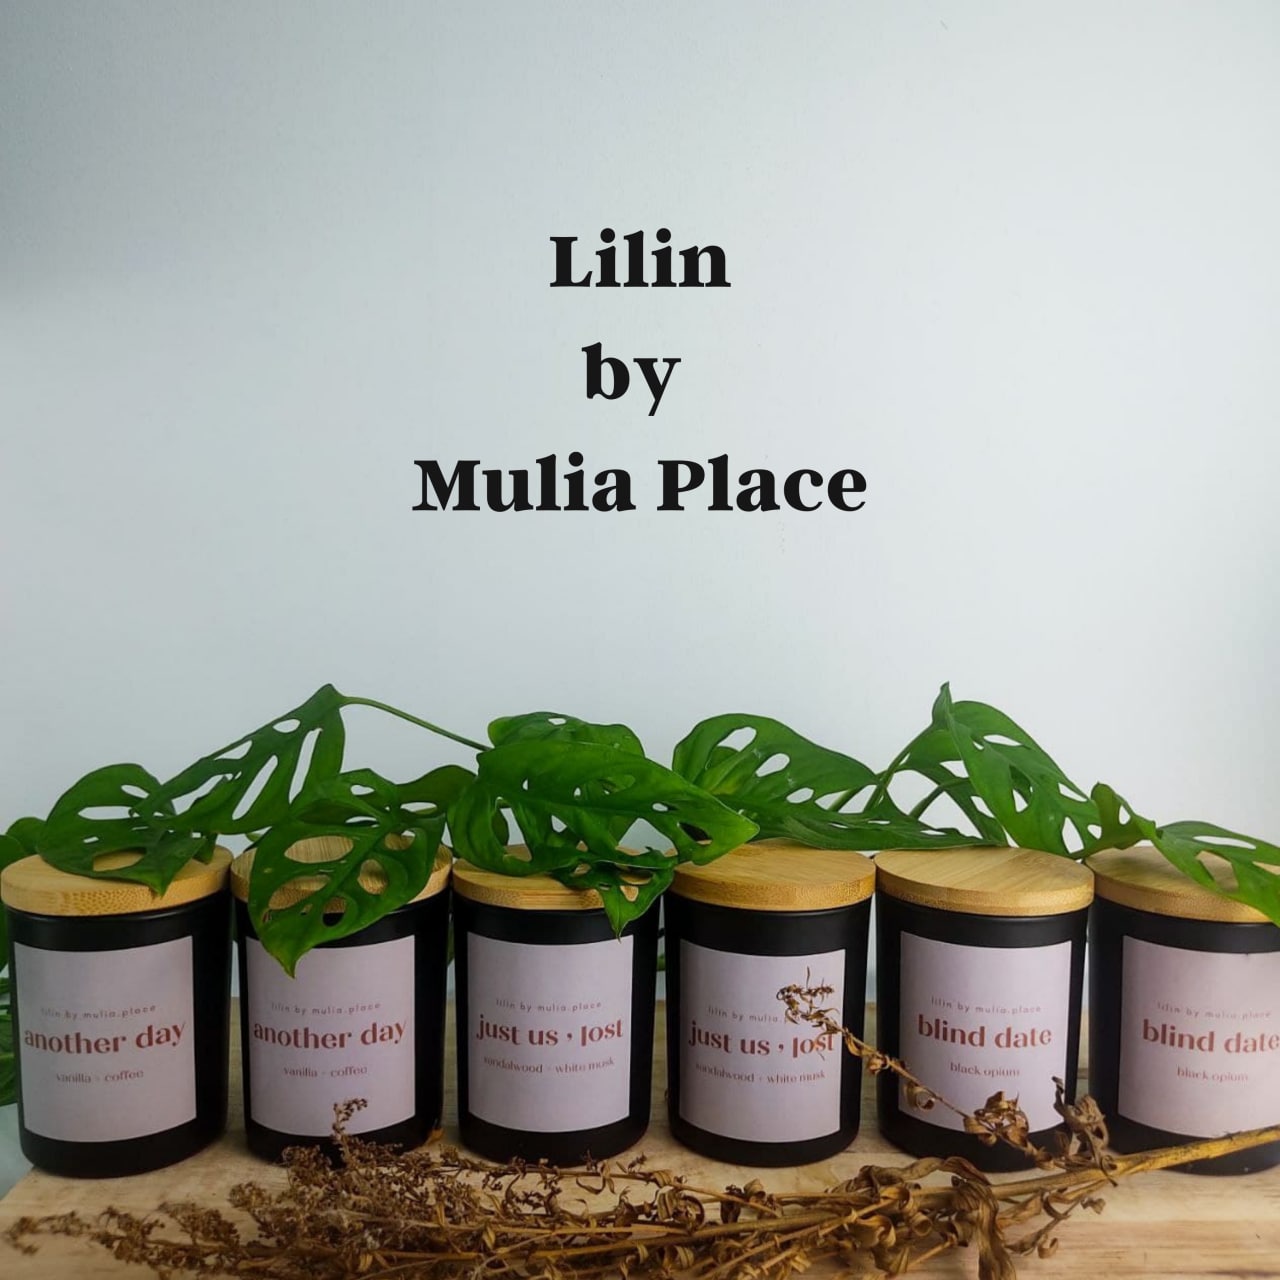 Lilin by Mulia Place